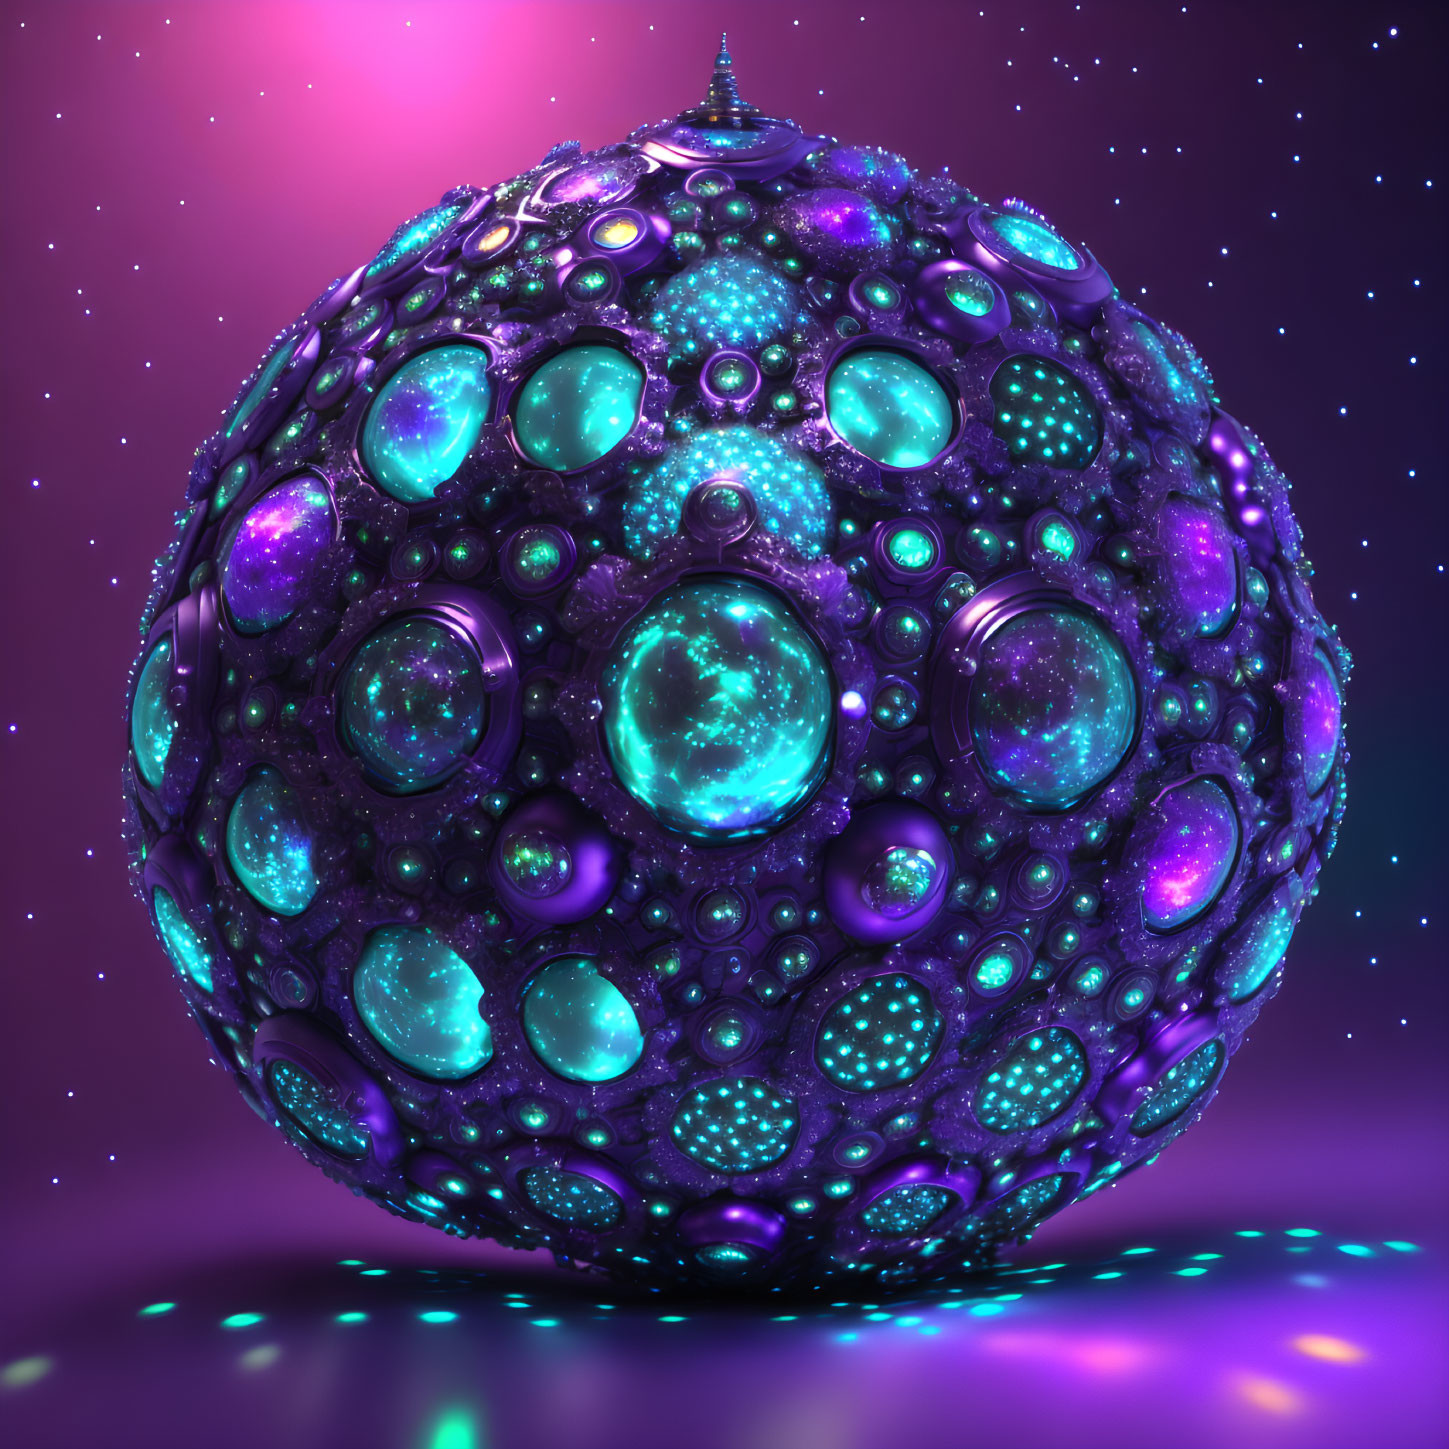 Colorful 3D-rendered sphere in starry space with teal and purple orbs